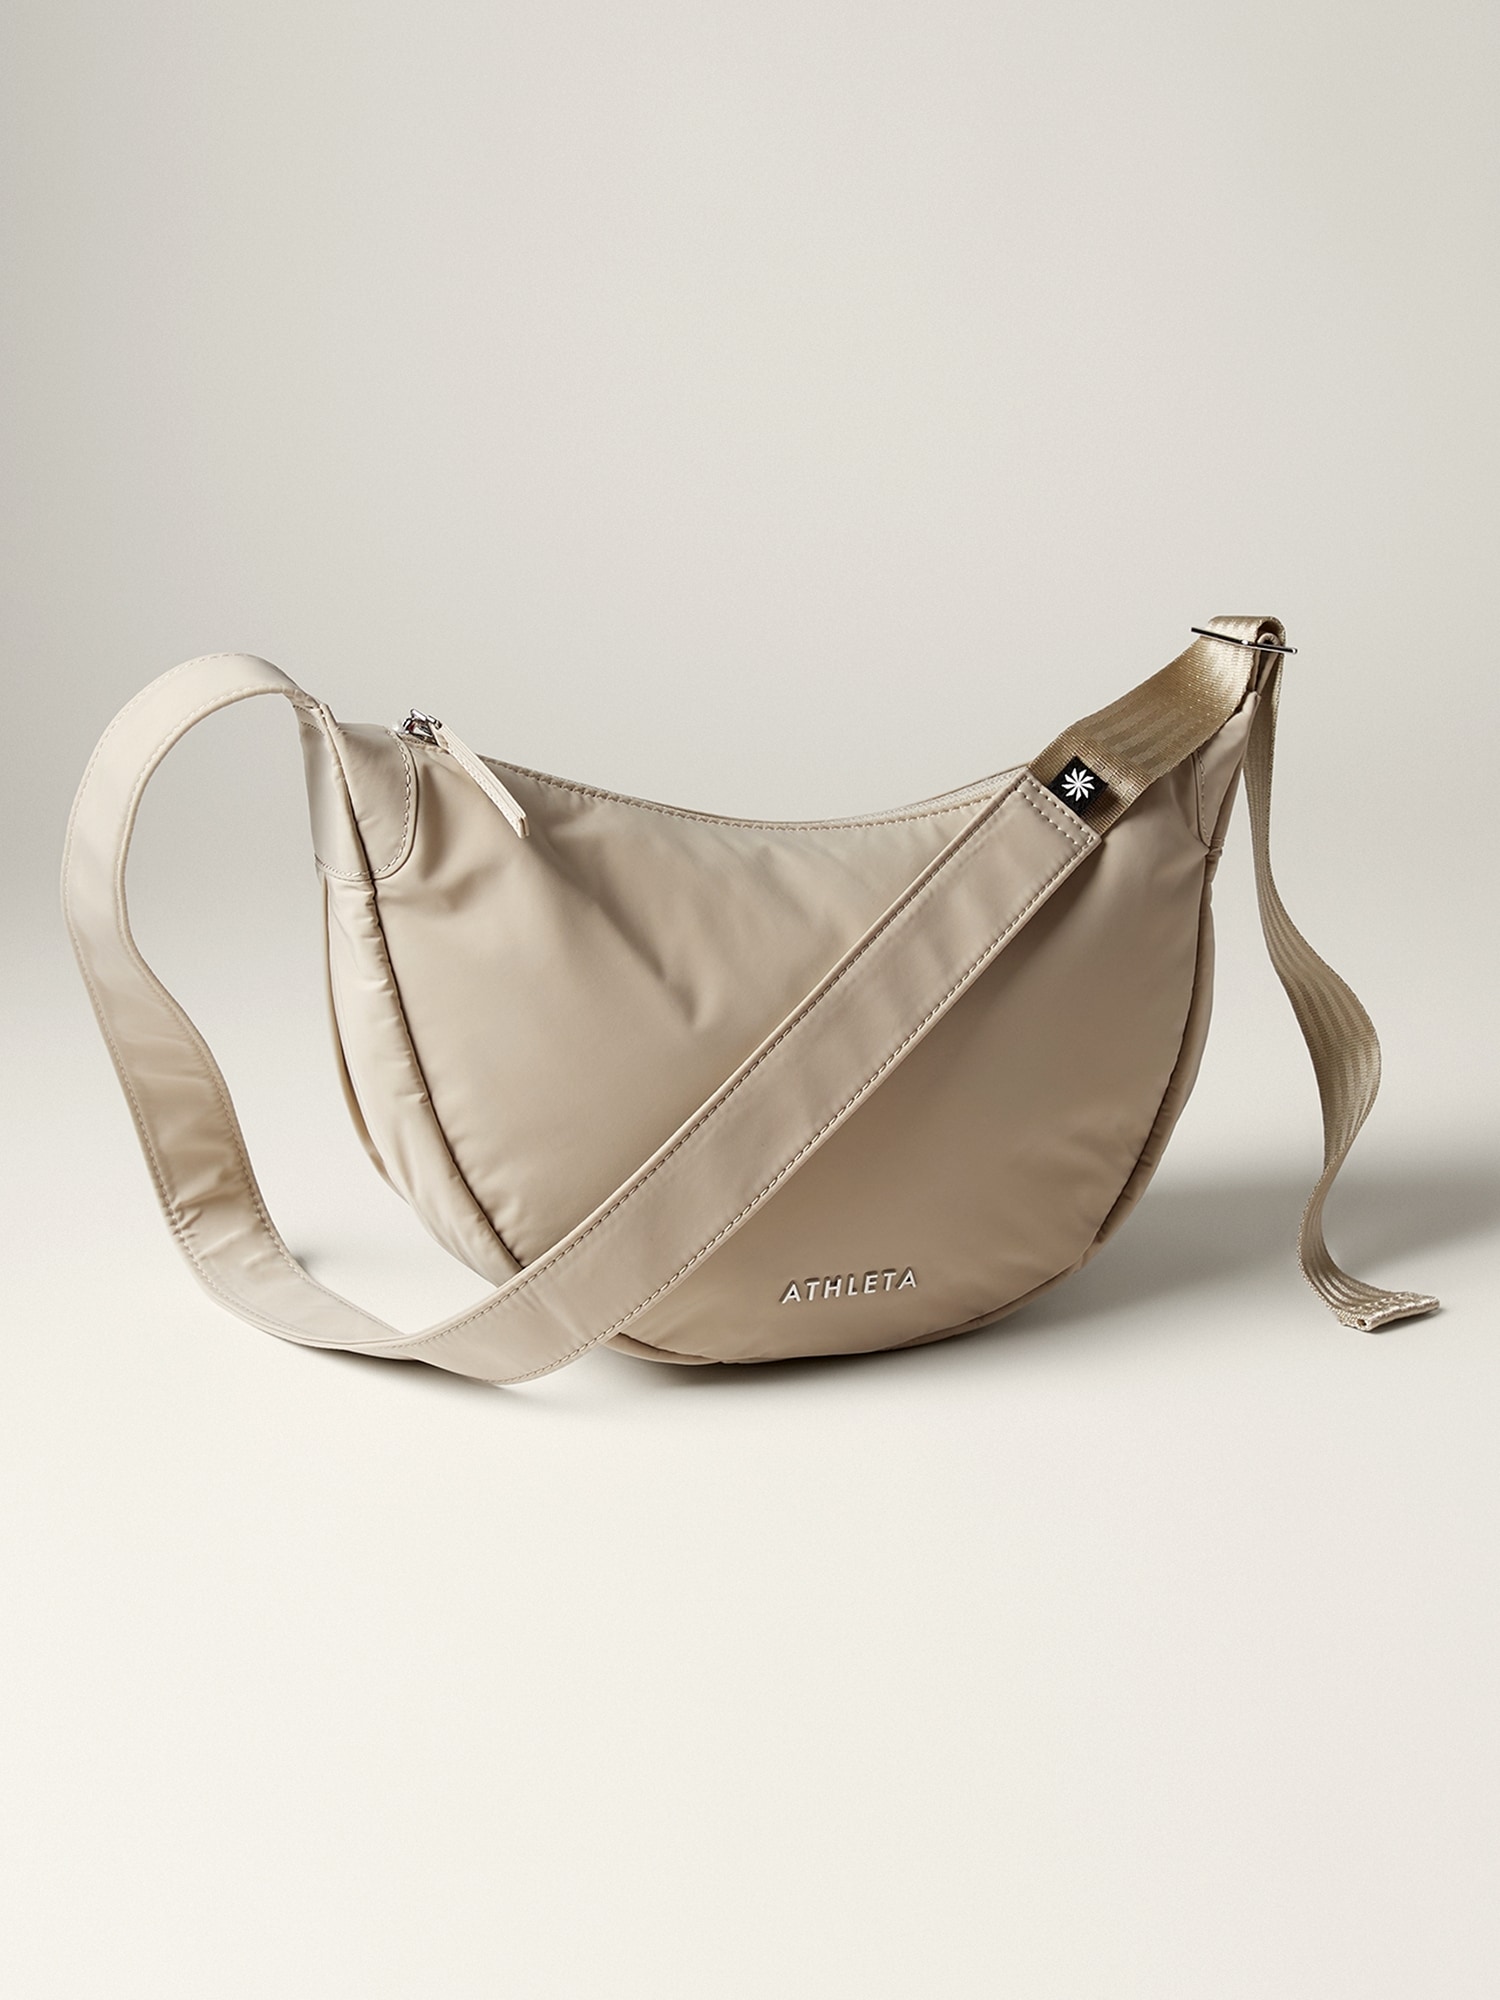 Athleta All About Crossbody Bag In Neutral